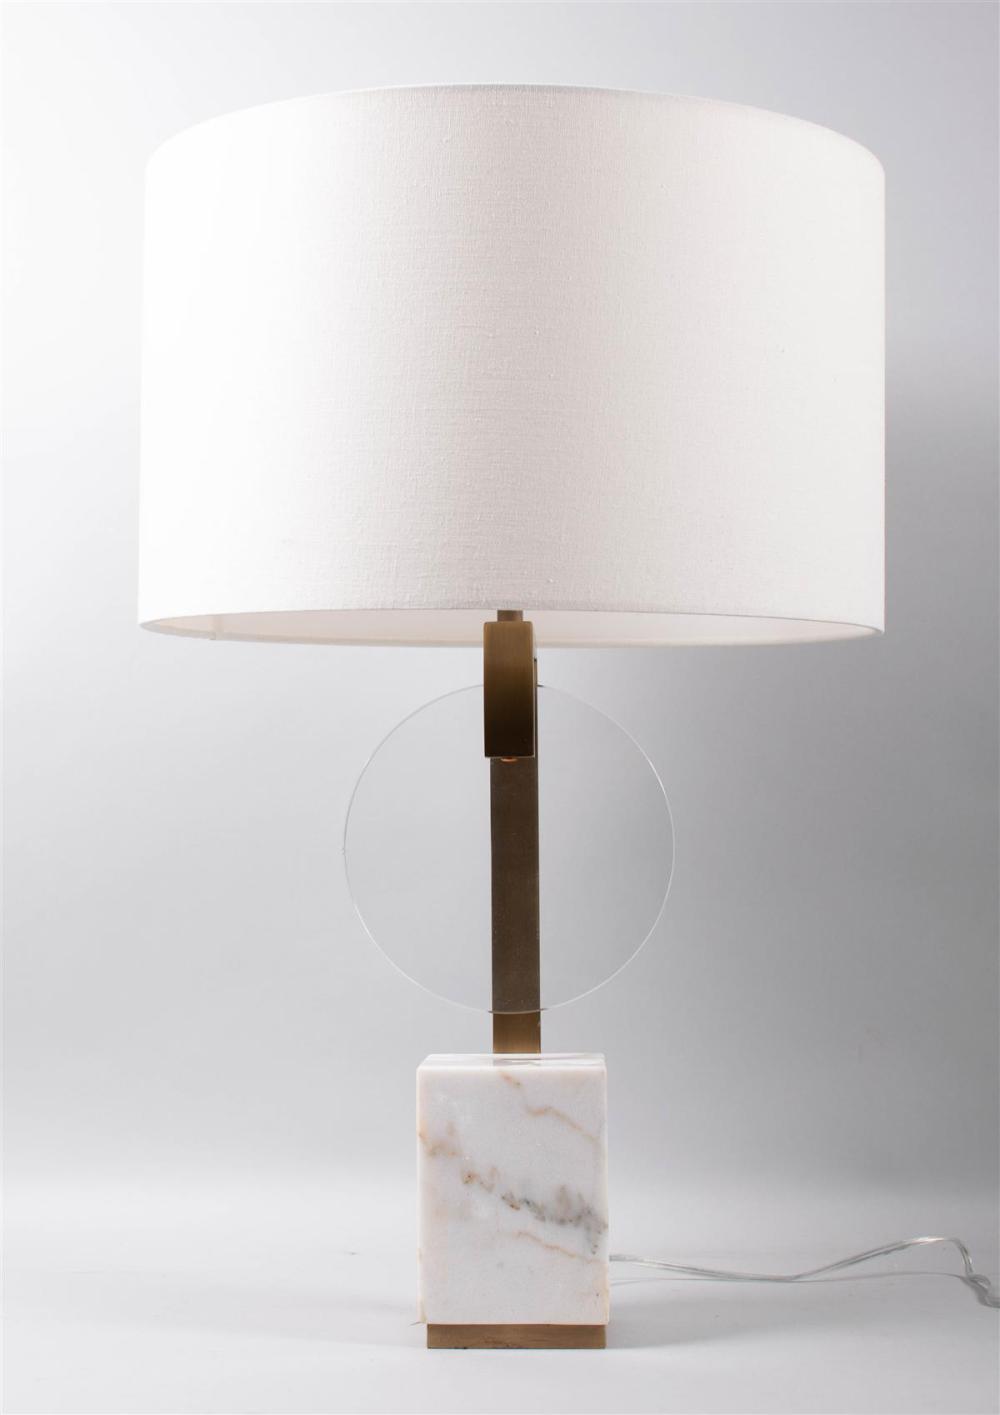 CONTEMPORARY GLASS TABLE LAMP ON 33b62a